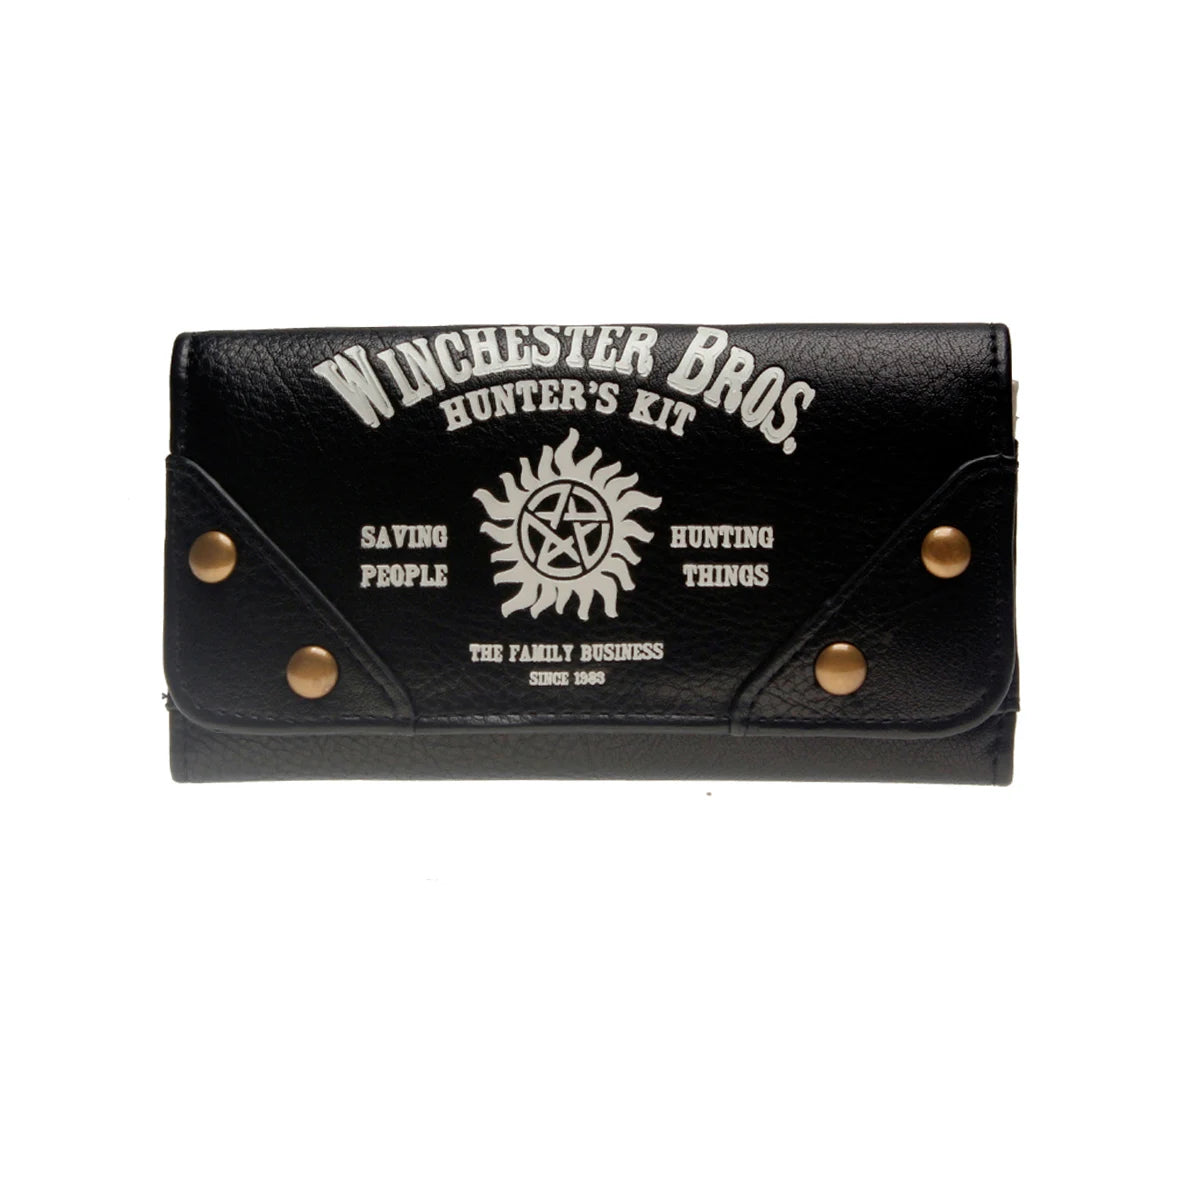 Hunters Wallet by The Winchester Brothers